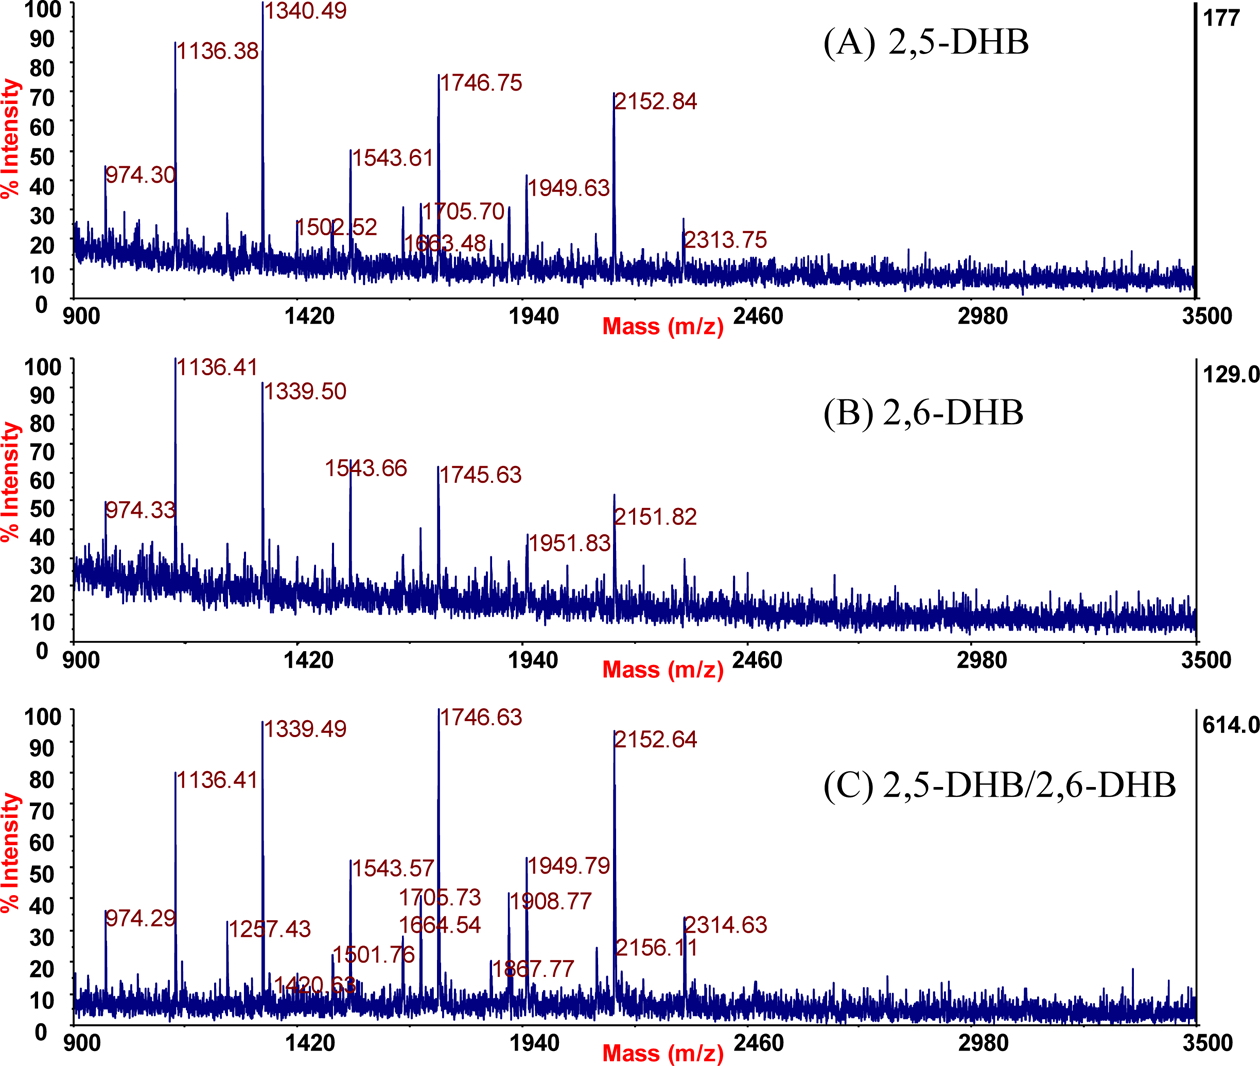 MALDI mass spectra of glycans released from ovalbumin obtained using (A) 2,5-DHB, (B) 2,6-DHB, and (C) 2,5-DHB/2,6-DHB matrices.